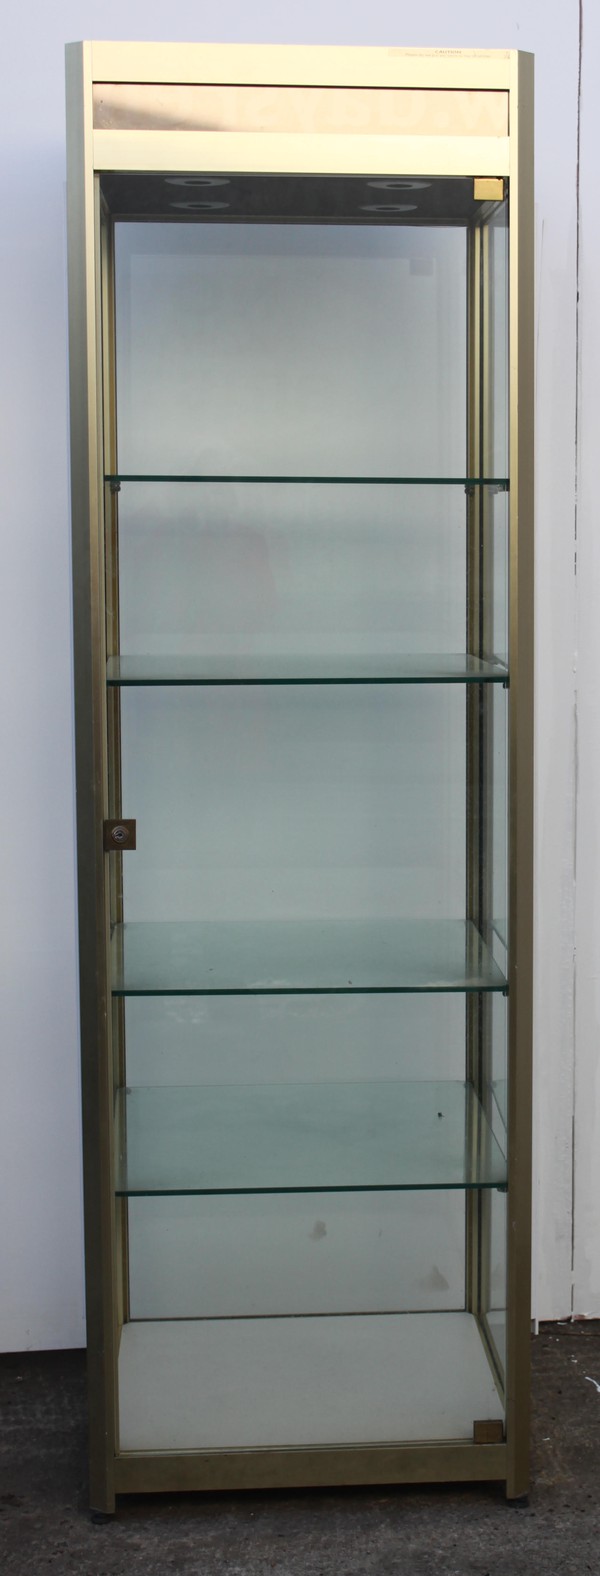 Secondhand 1940mm Glass Display Cabinet For Sale